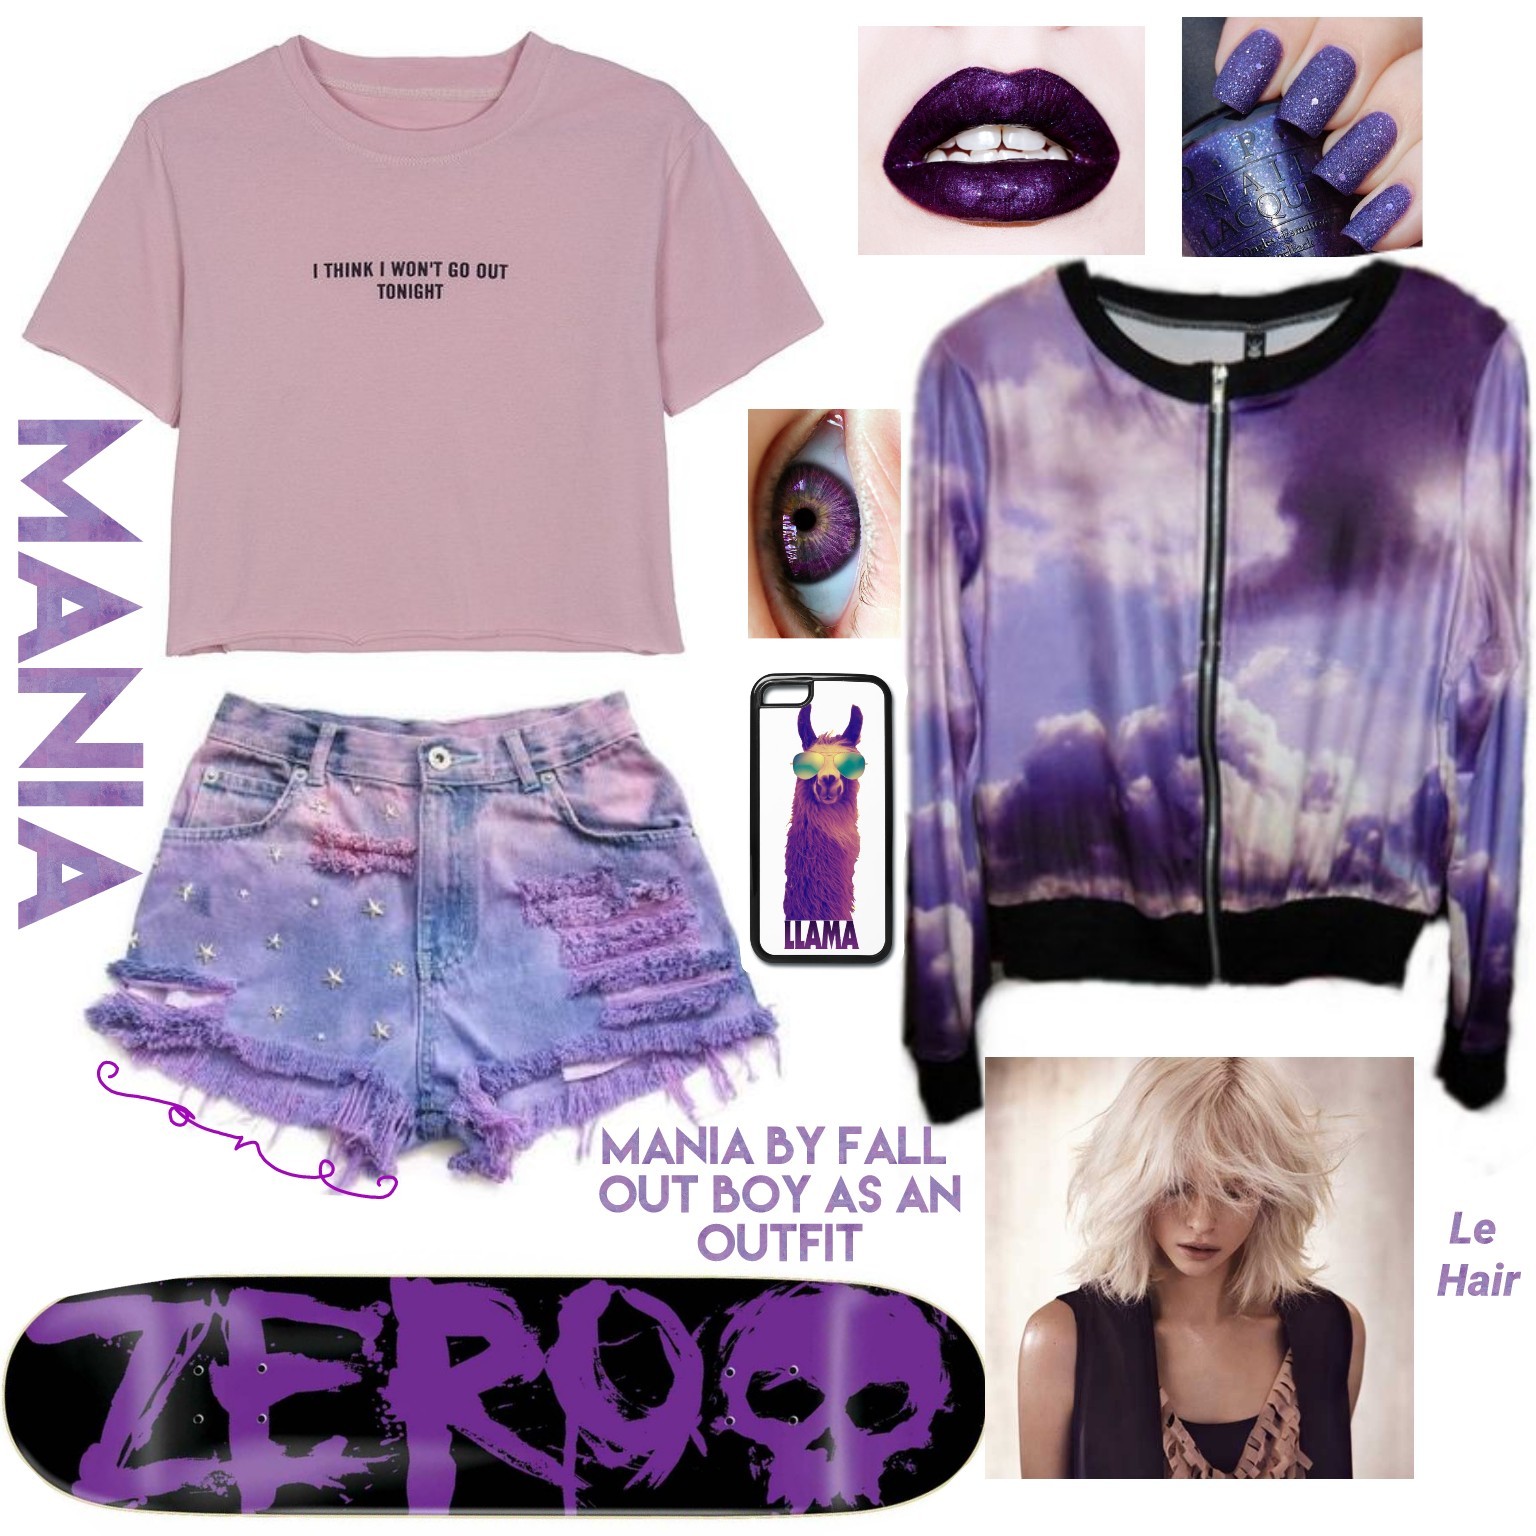 Mania by fall out boy as an outfit